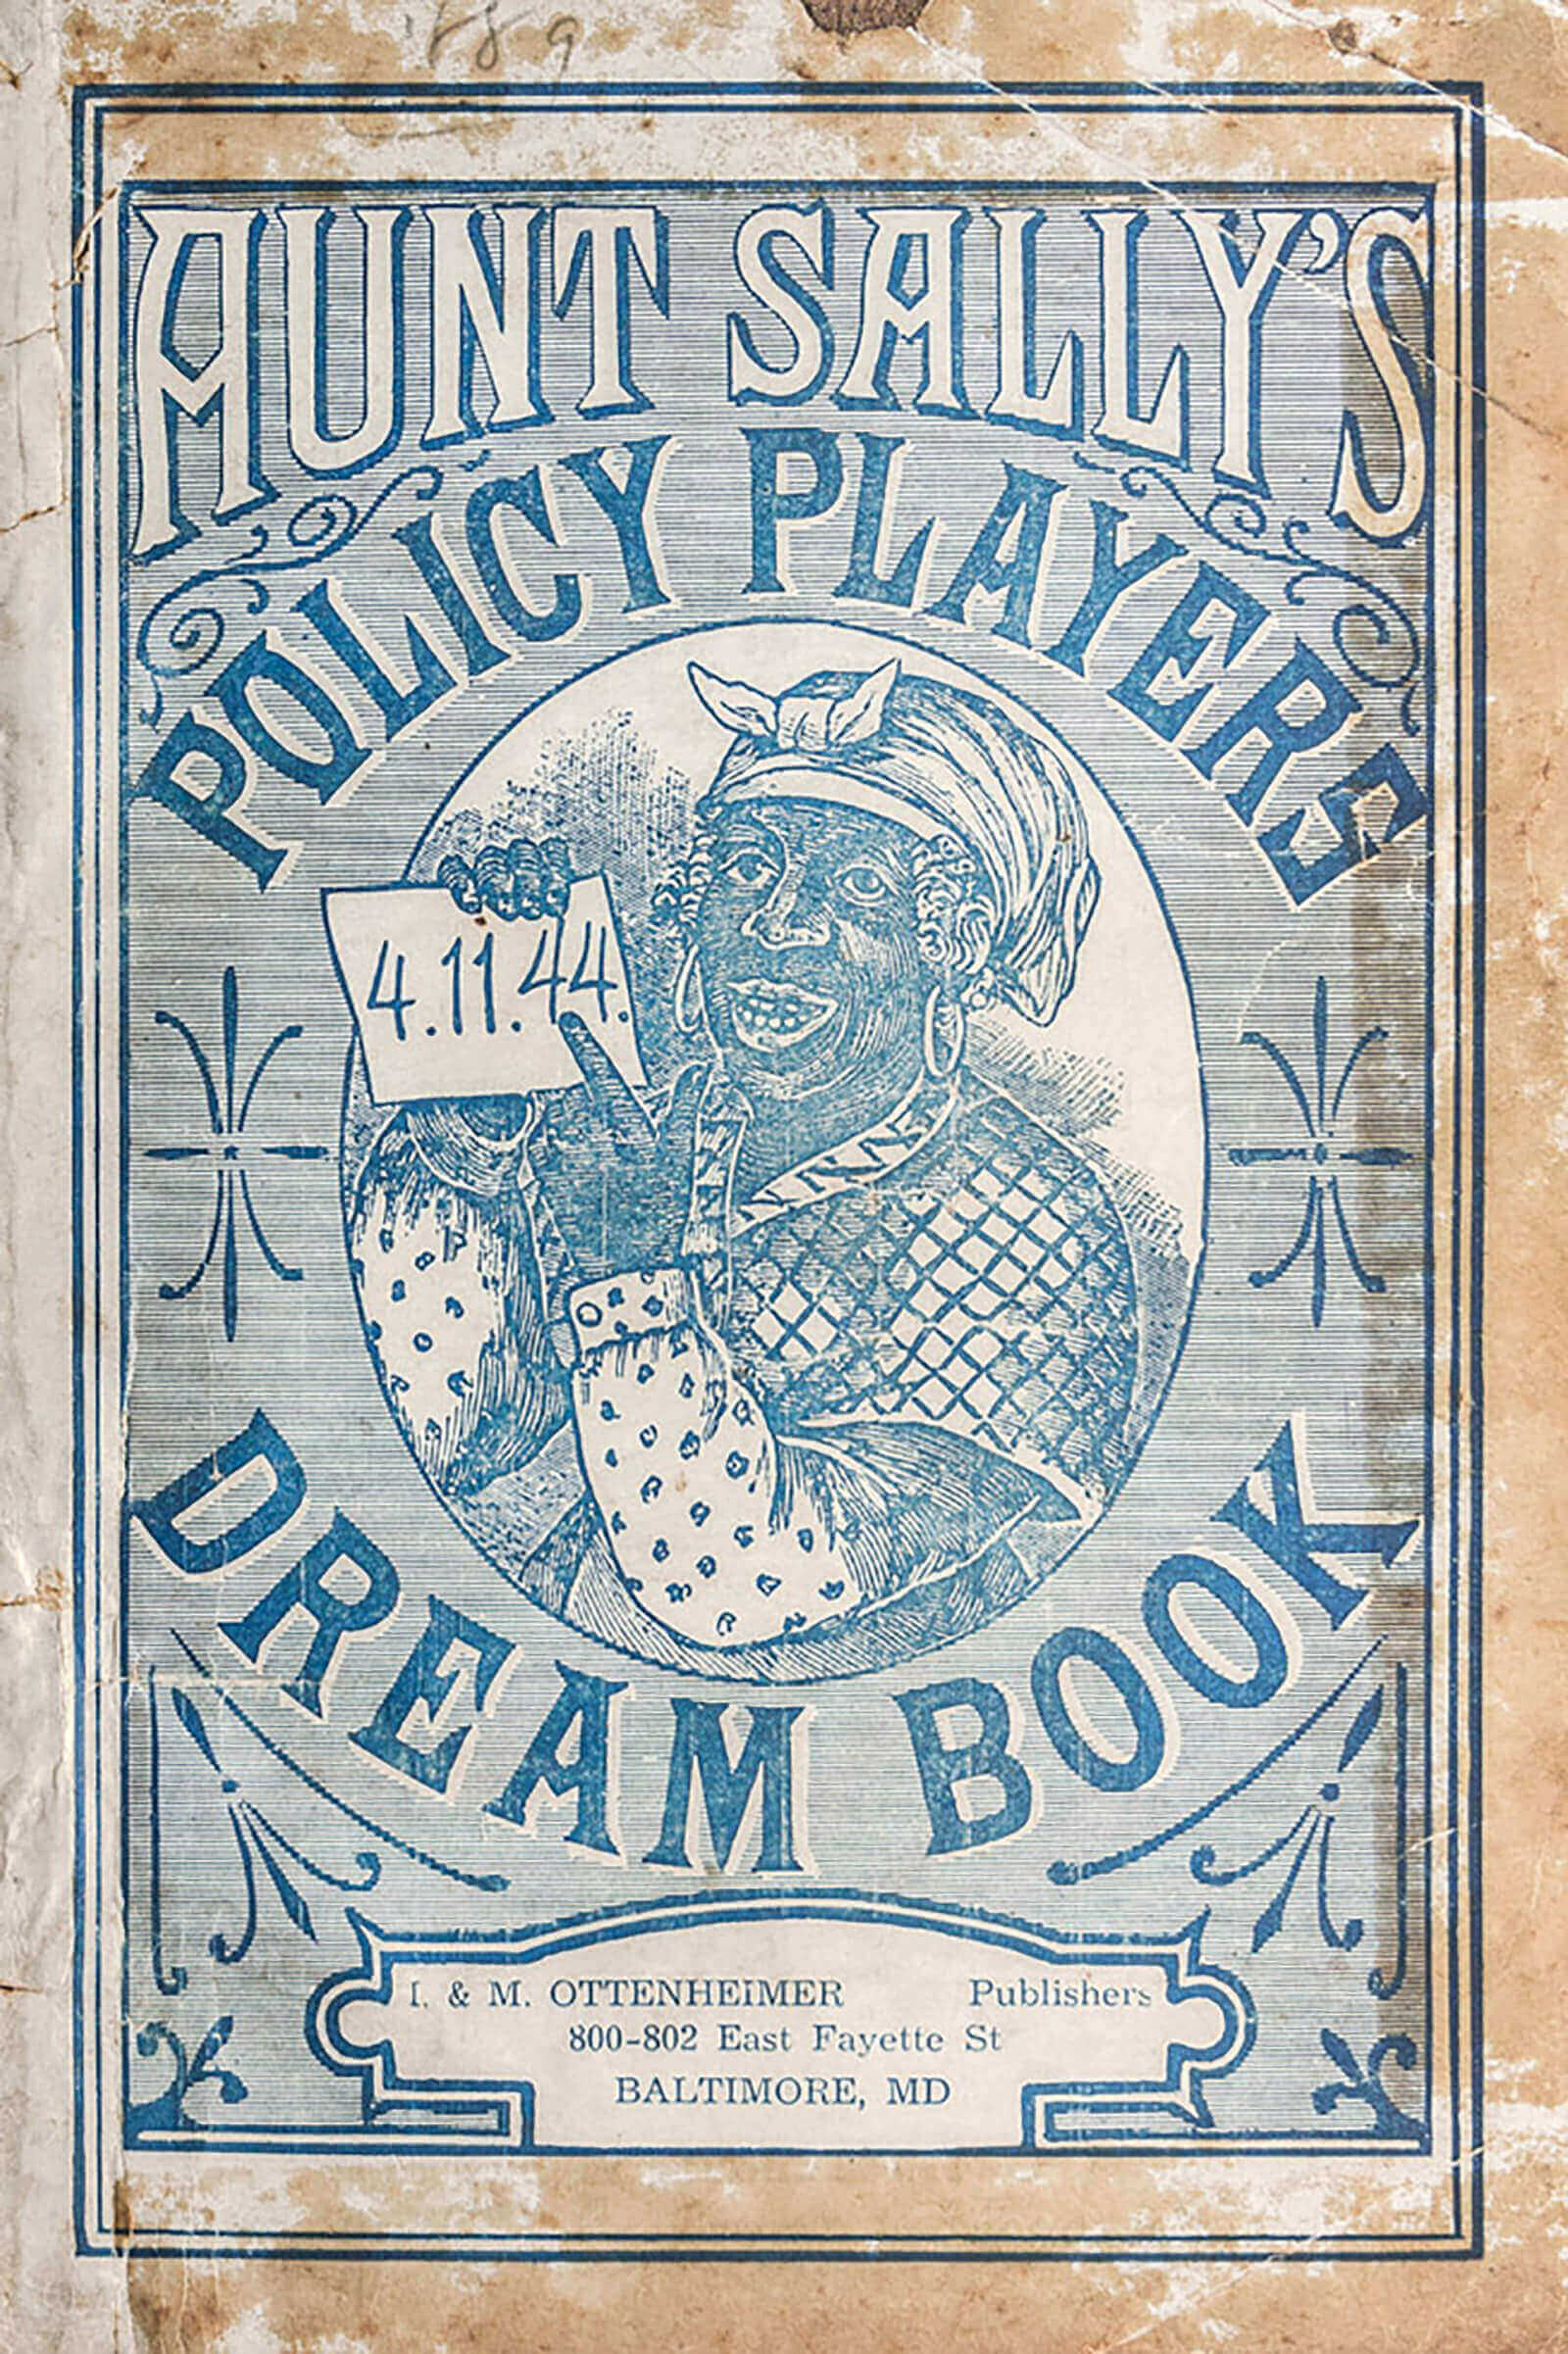 Aunt Sally’s Policy Players Dream Book was the preeminent dream book of the nineteenth century. Originally published by Wehman Bros. in 1889, the copy here was issued later that year by I. & M. Ottenheimer of Baltimore.